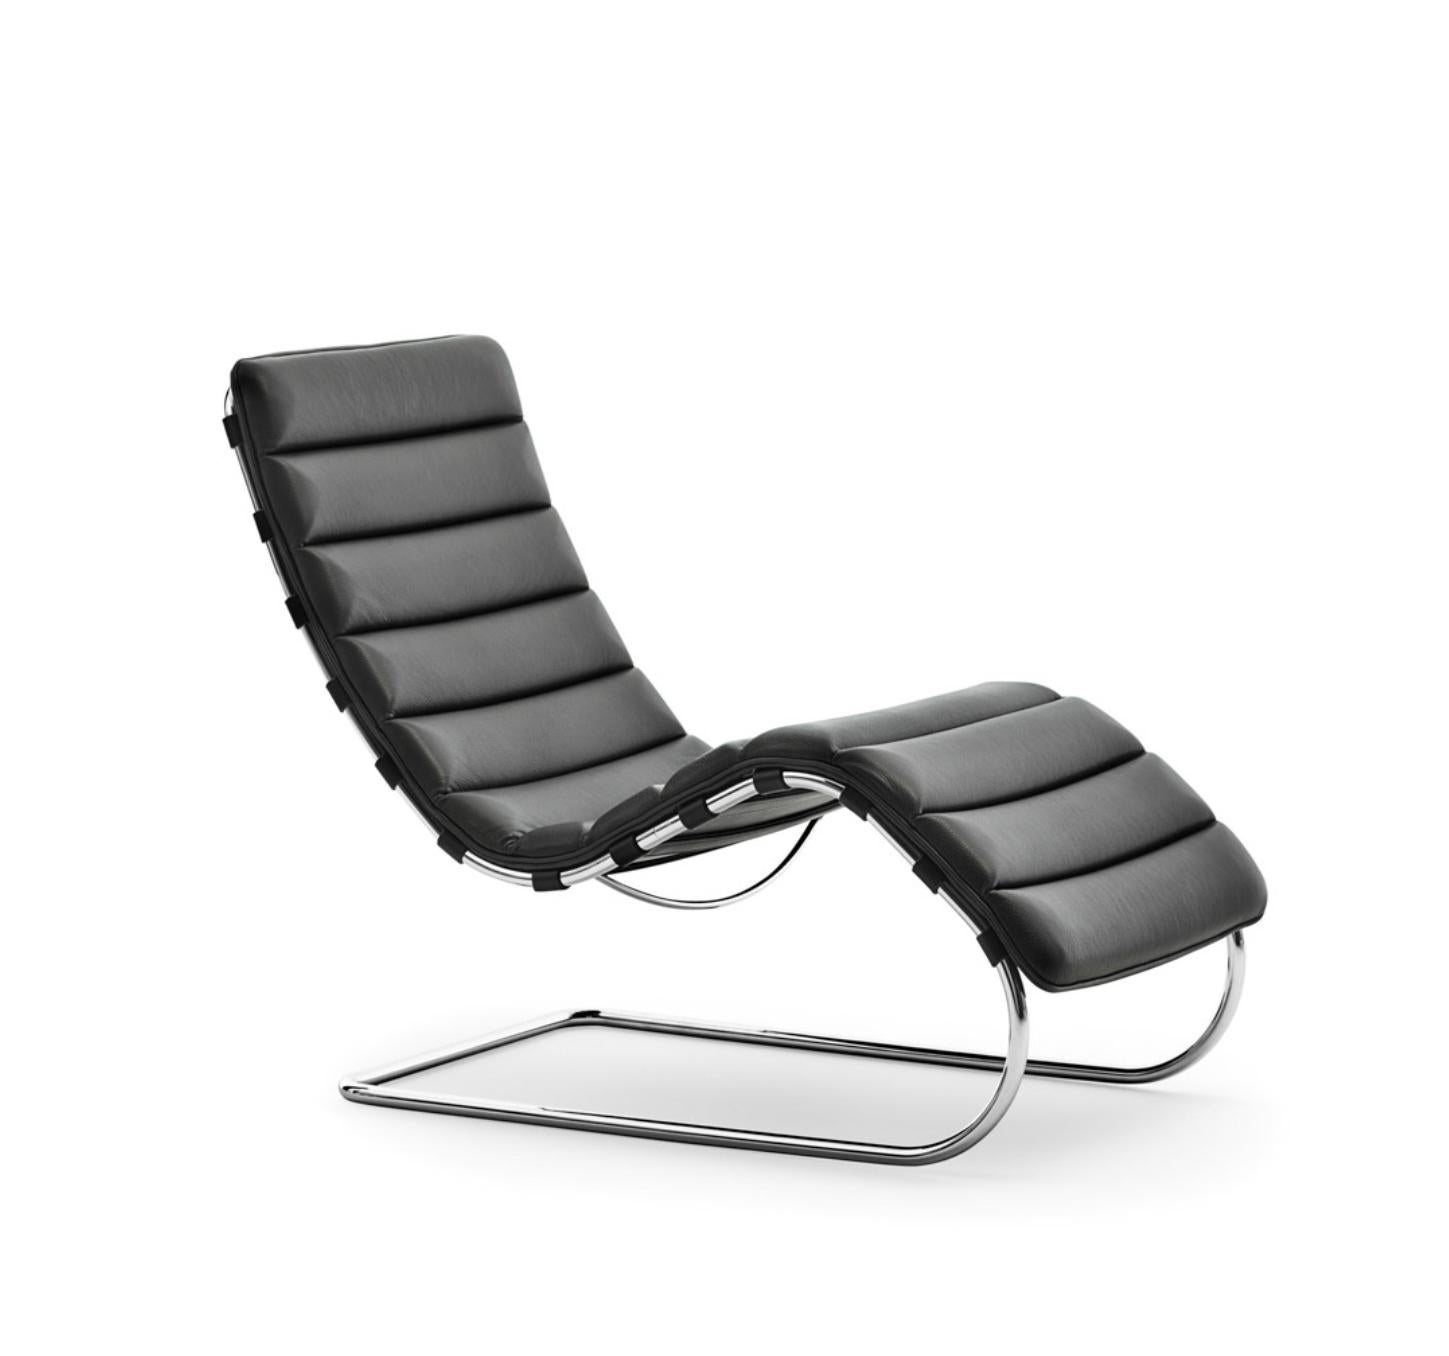 Mies van der Rohe for Knoll black leather MR chaise lounge, 241LS, 1927. Black Sabrina leather. Tubular steel. Cantilever lounger.

 The MR Collection represents some of the first tubular steel furniture designs of the early 20th century